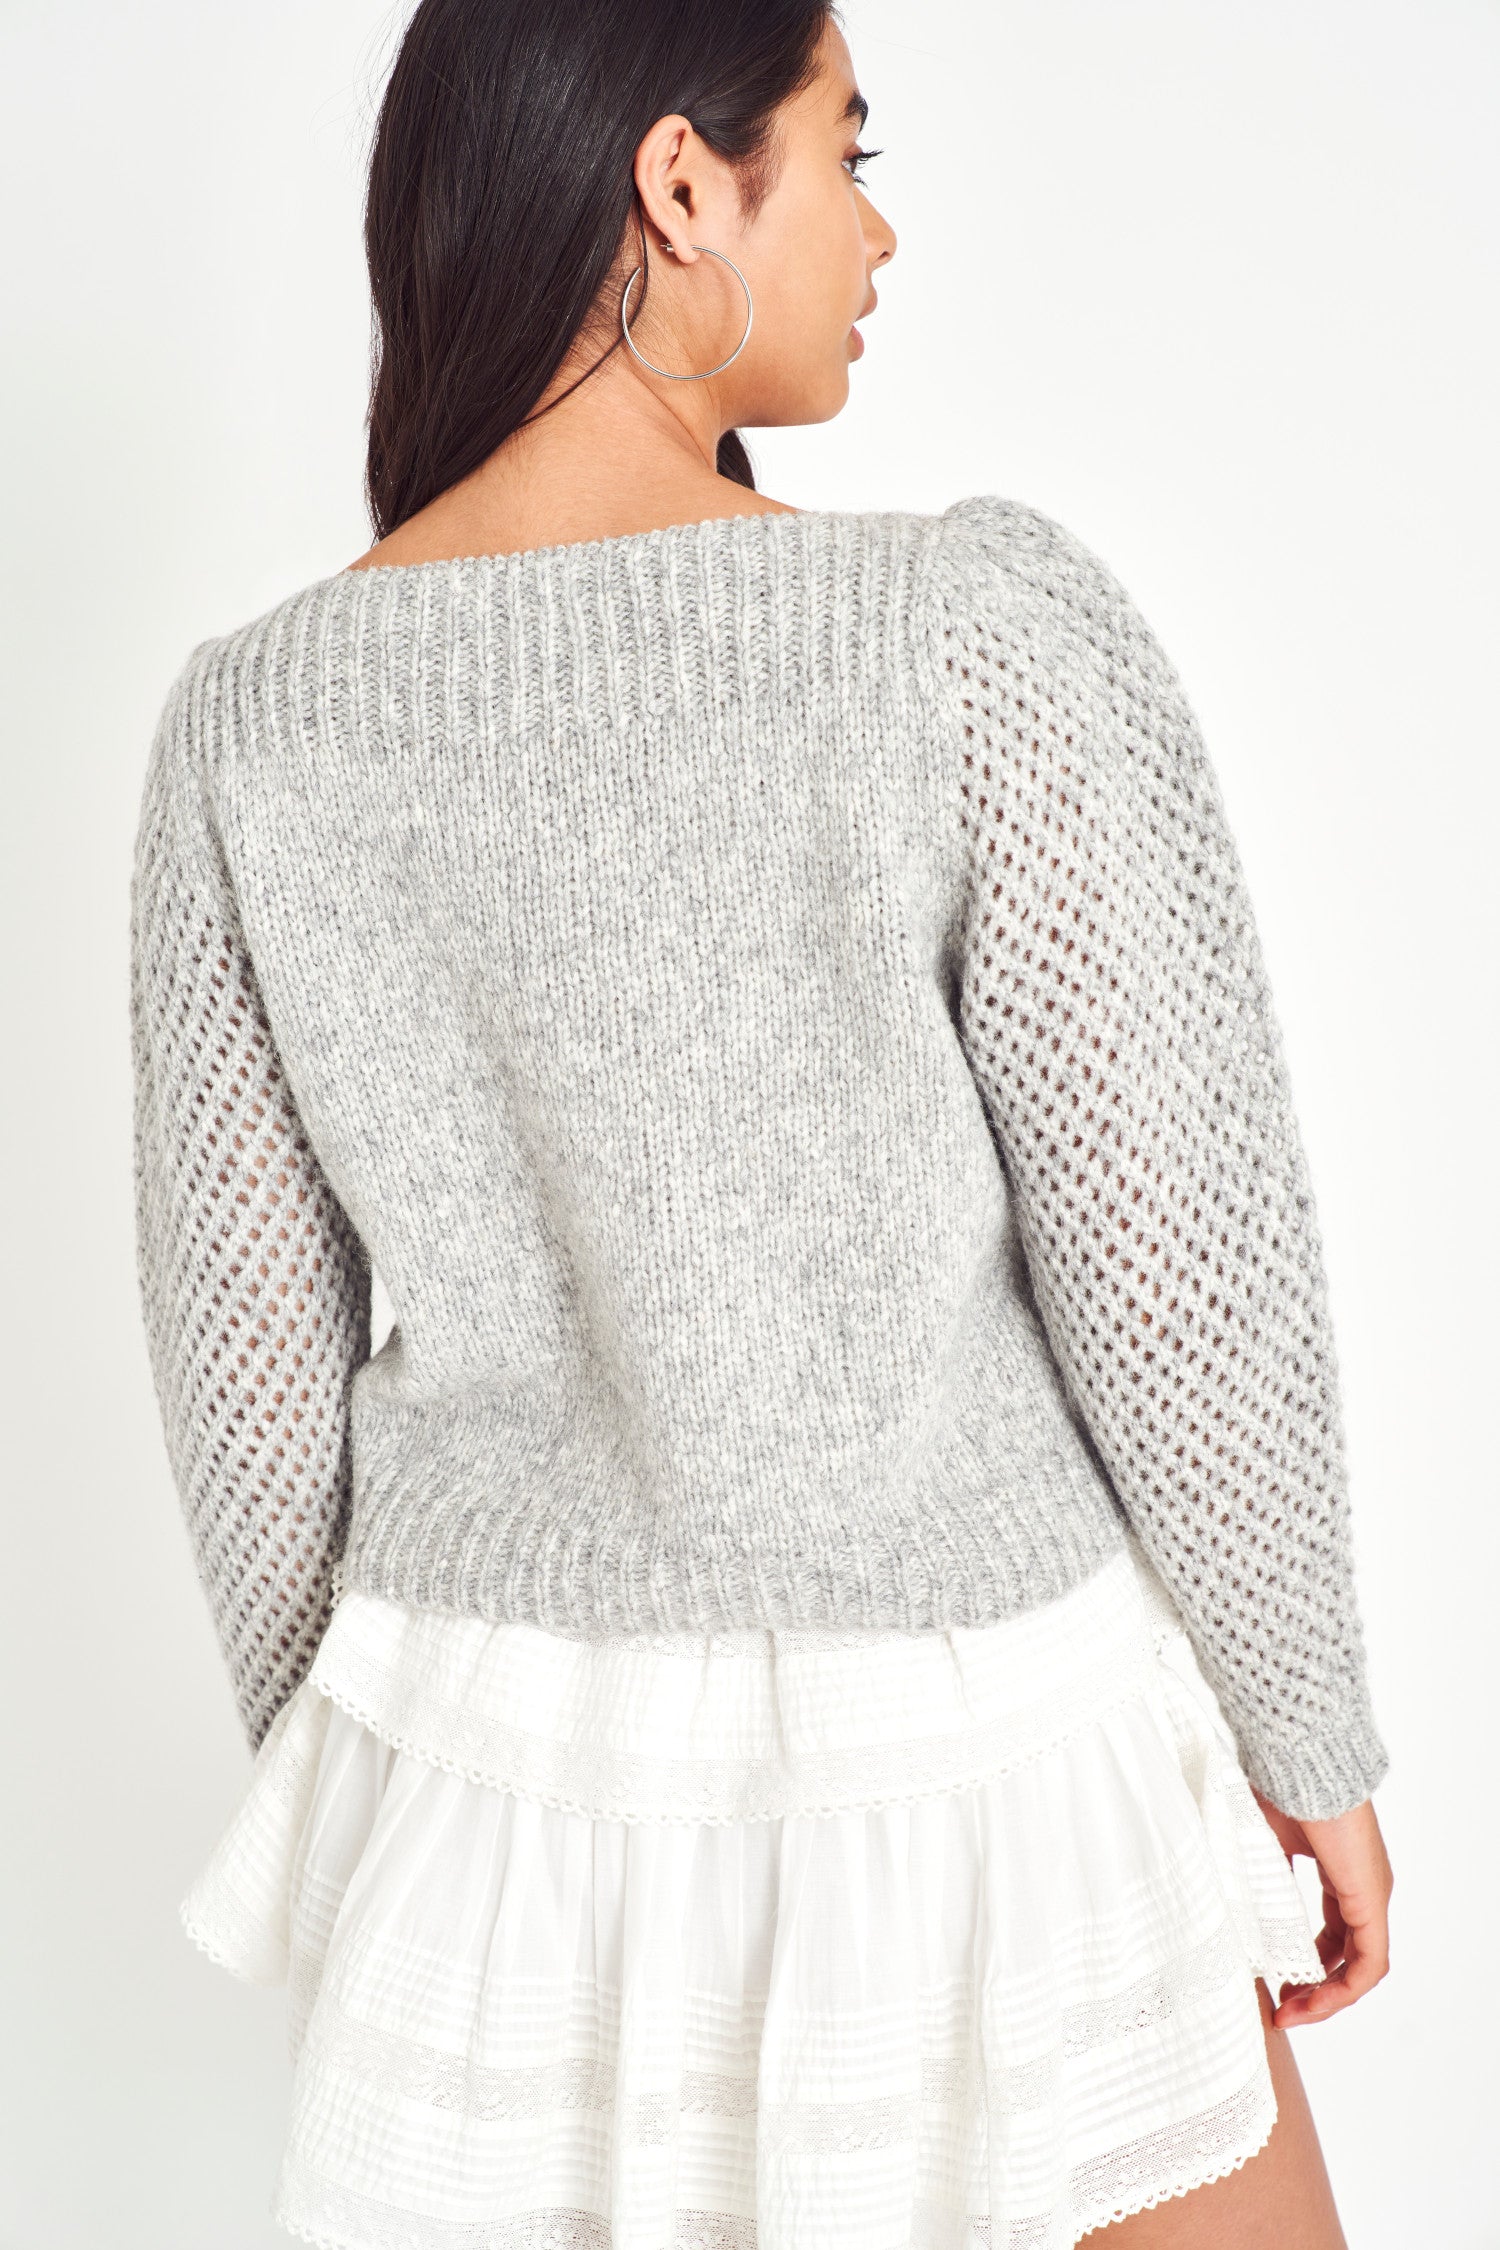 The Rosie pullover is made from baby alpaca while being extremely light and full with a chunky look. It has a straight rib neckline and a straight body with rib finishing. It is an open knit weave with a puffy shoulder that slims out at the bottom.